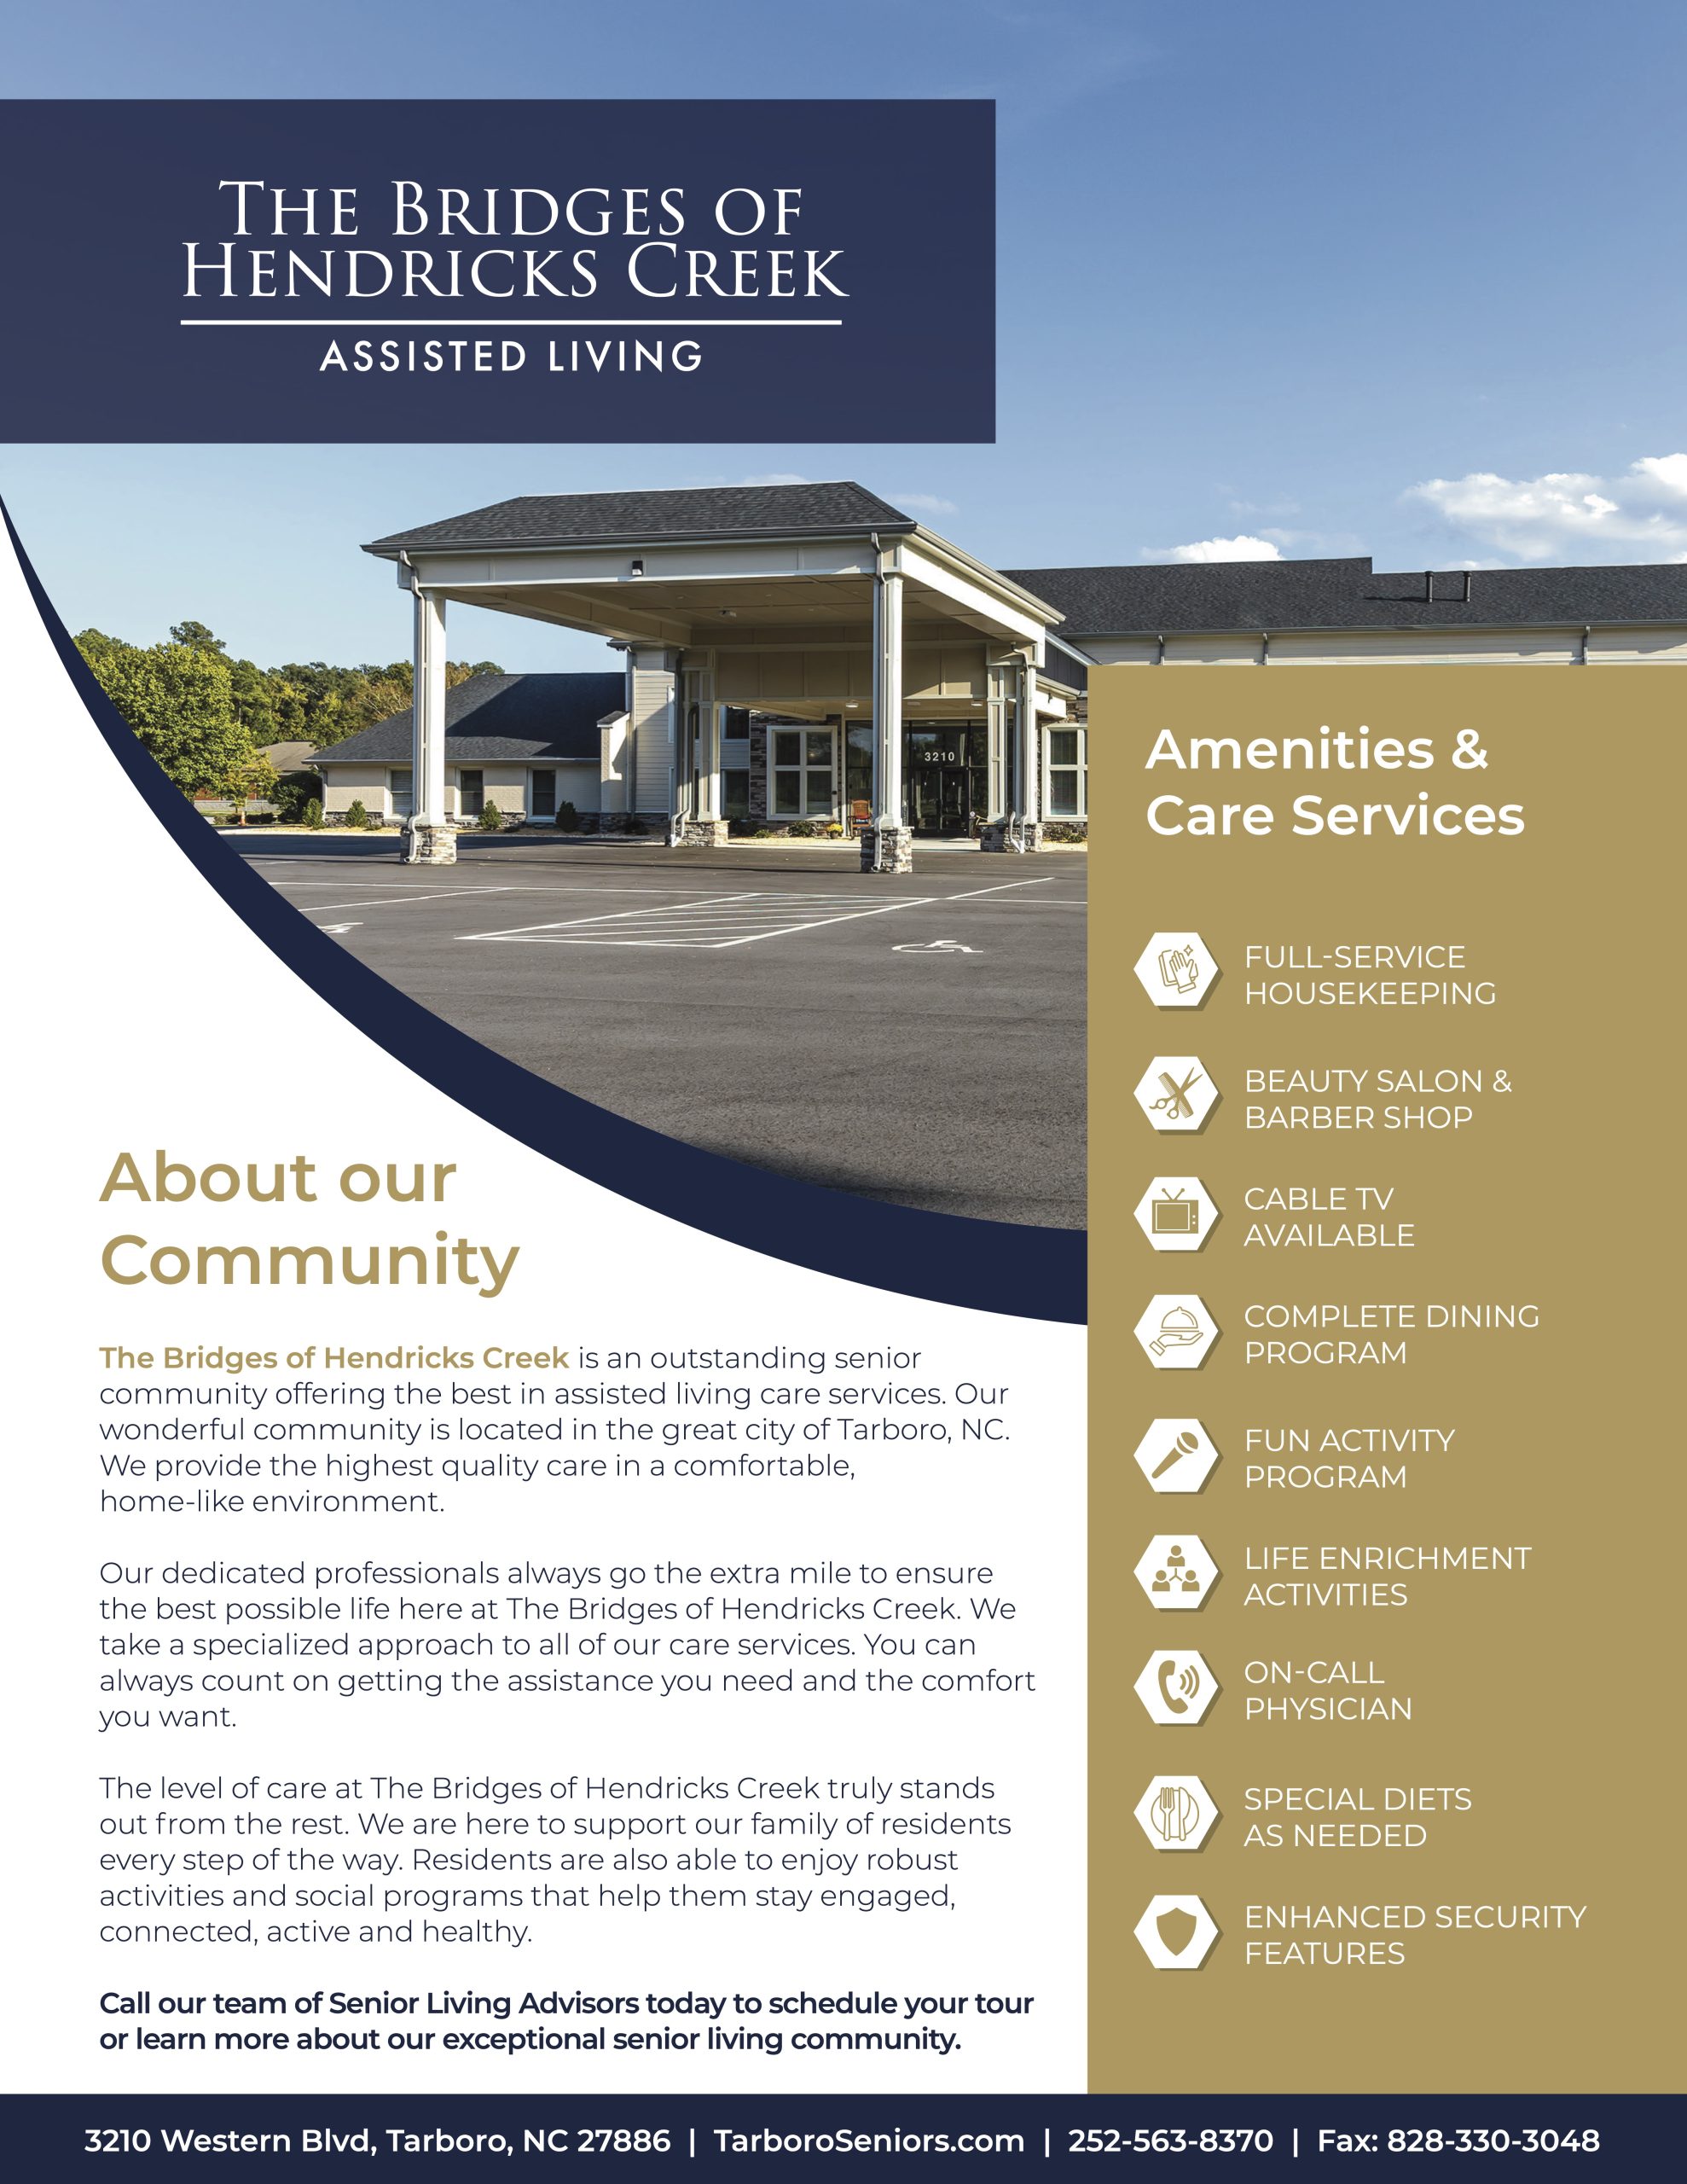 The Bridges of Hendricks Creek - About our Services